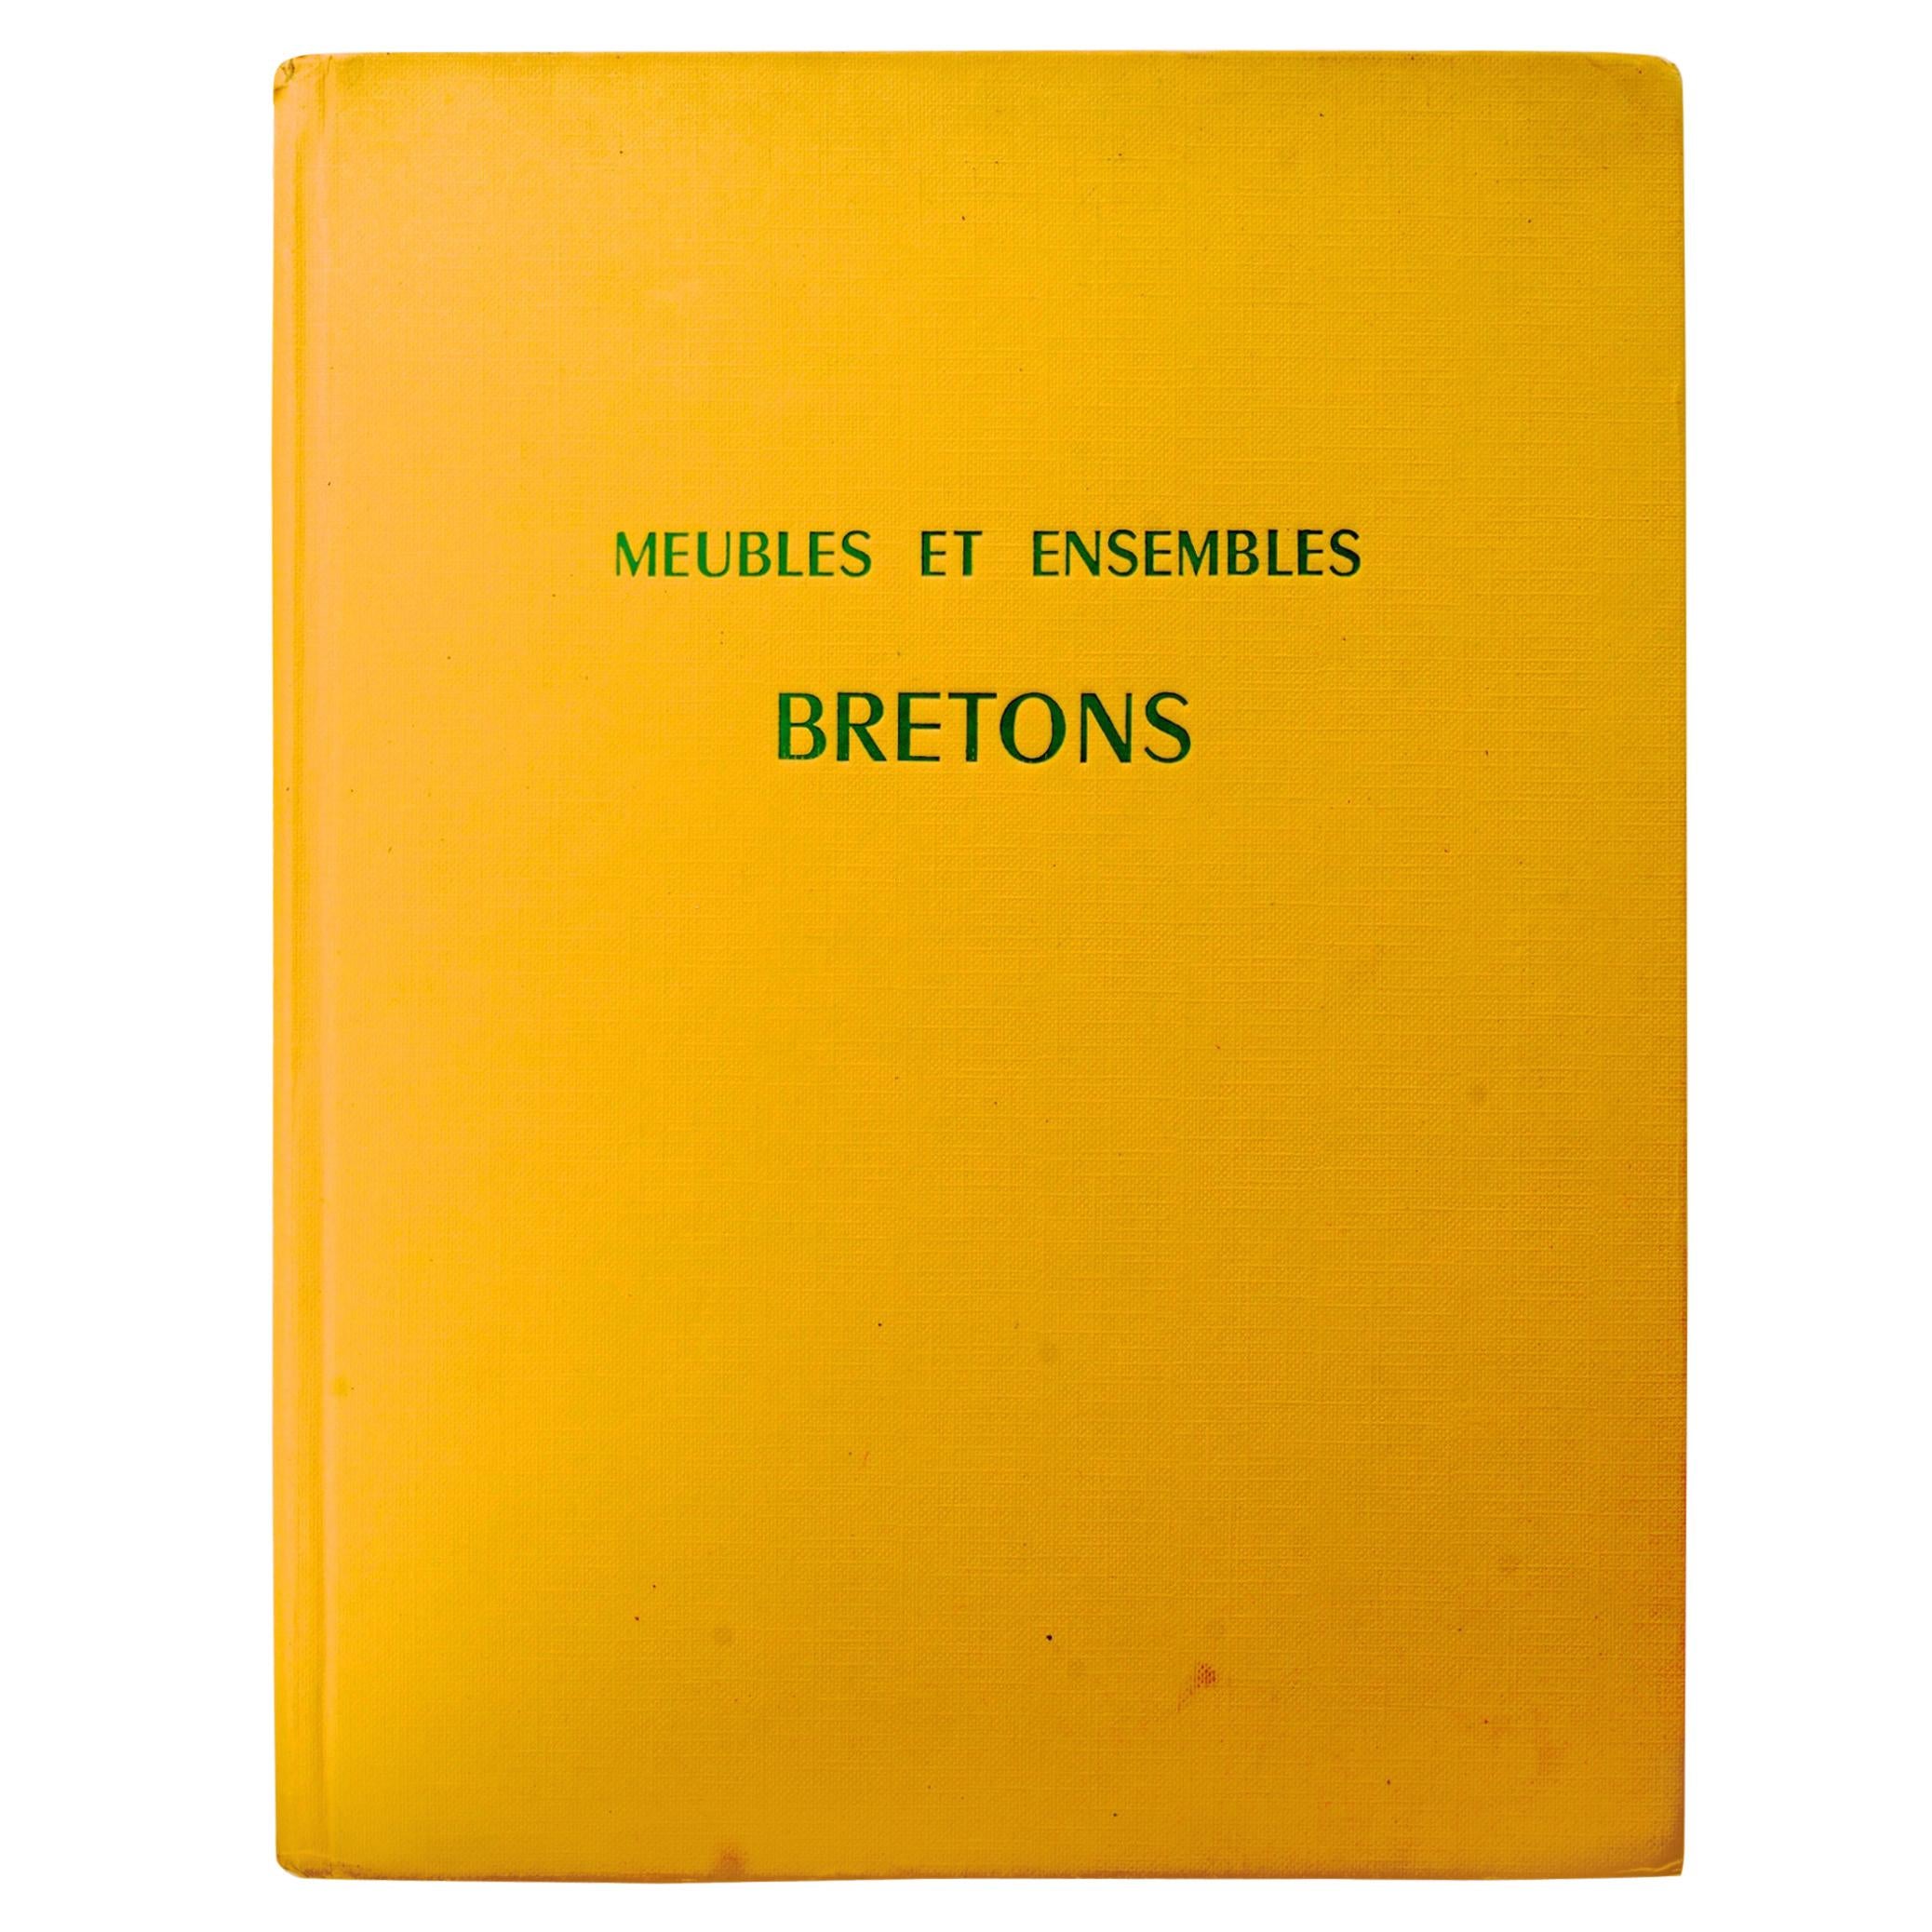 Meubles et Ensembles Bretons by Stany Gauthier, First Edition